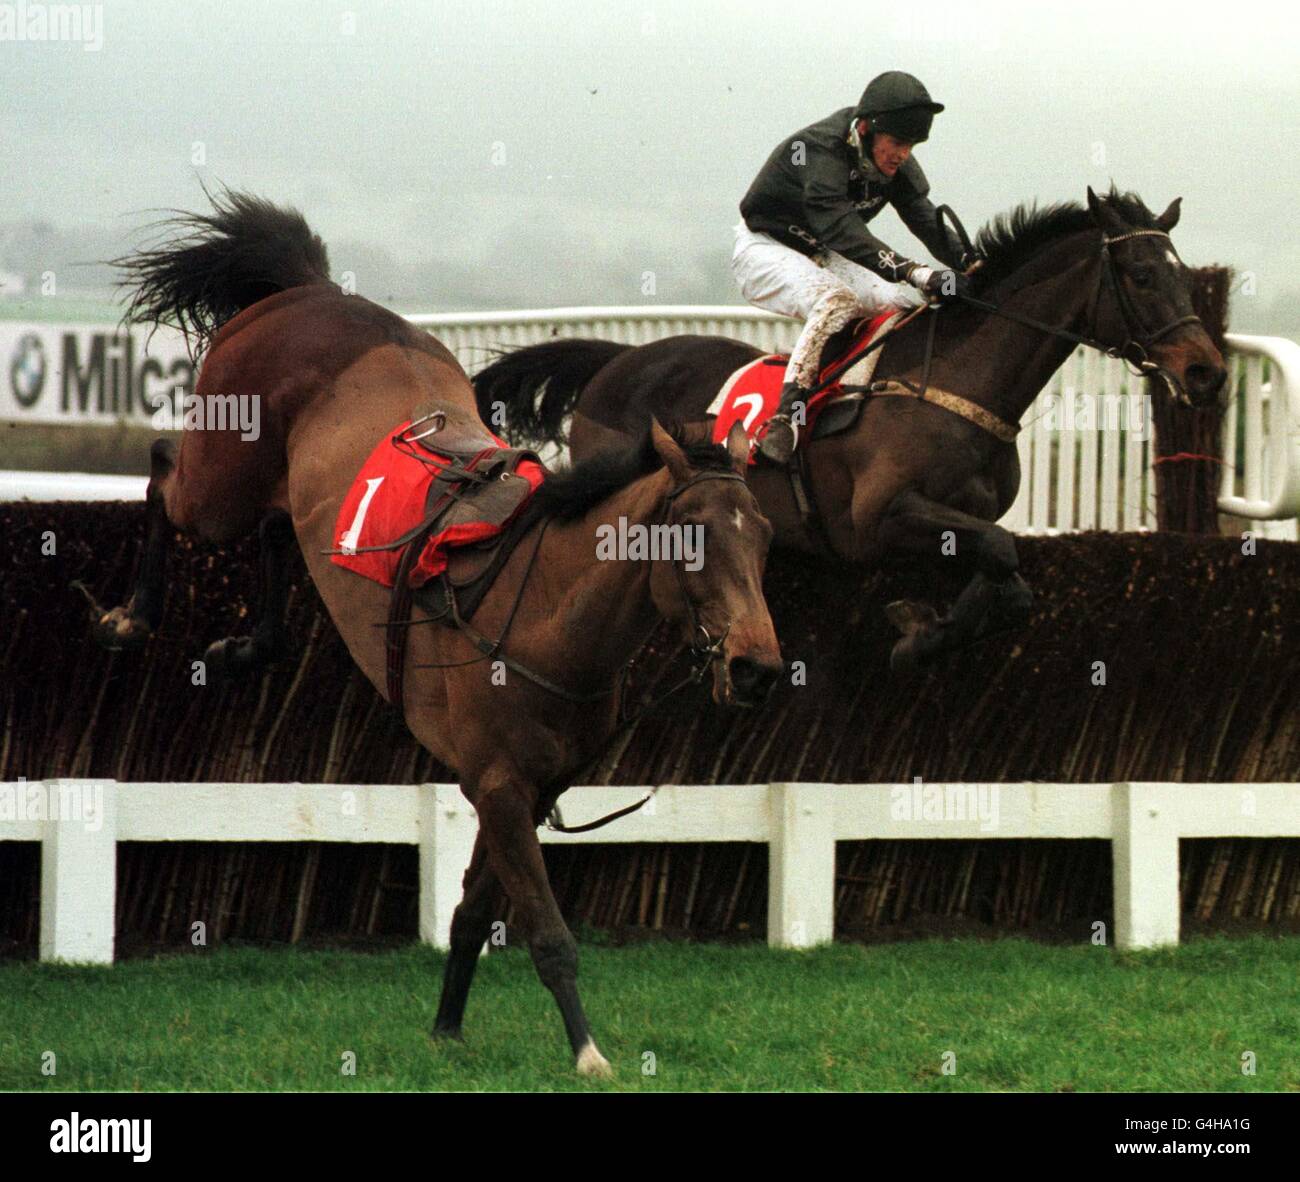 Unsinkable Boxer jumps the last fence without jockey Tony McCoy, who came off at the second last, in the Timeform Novices' Handicap Chase at Cheltenham. Chicodari (ridden by Joe Tizzard) is in the background. The race was won by Flaxley Wood. Stock Photo